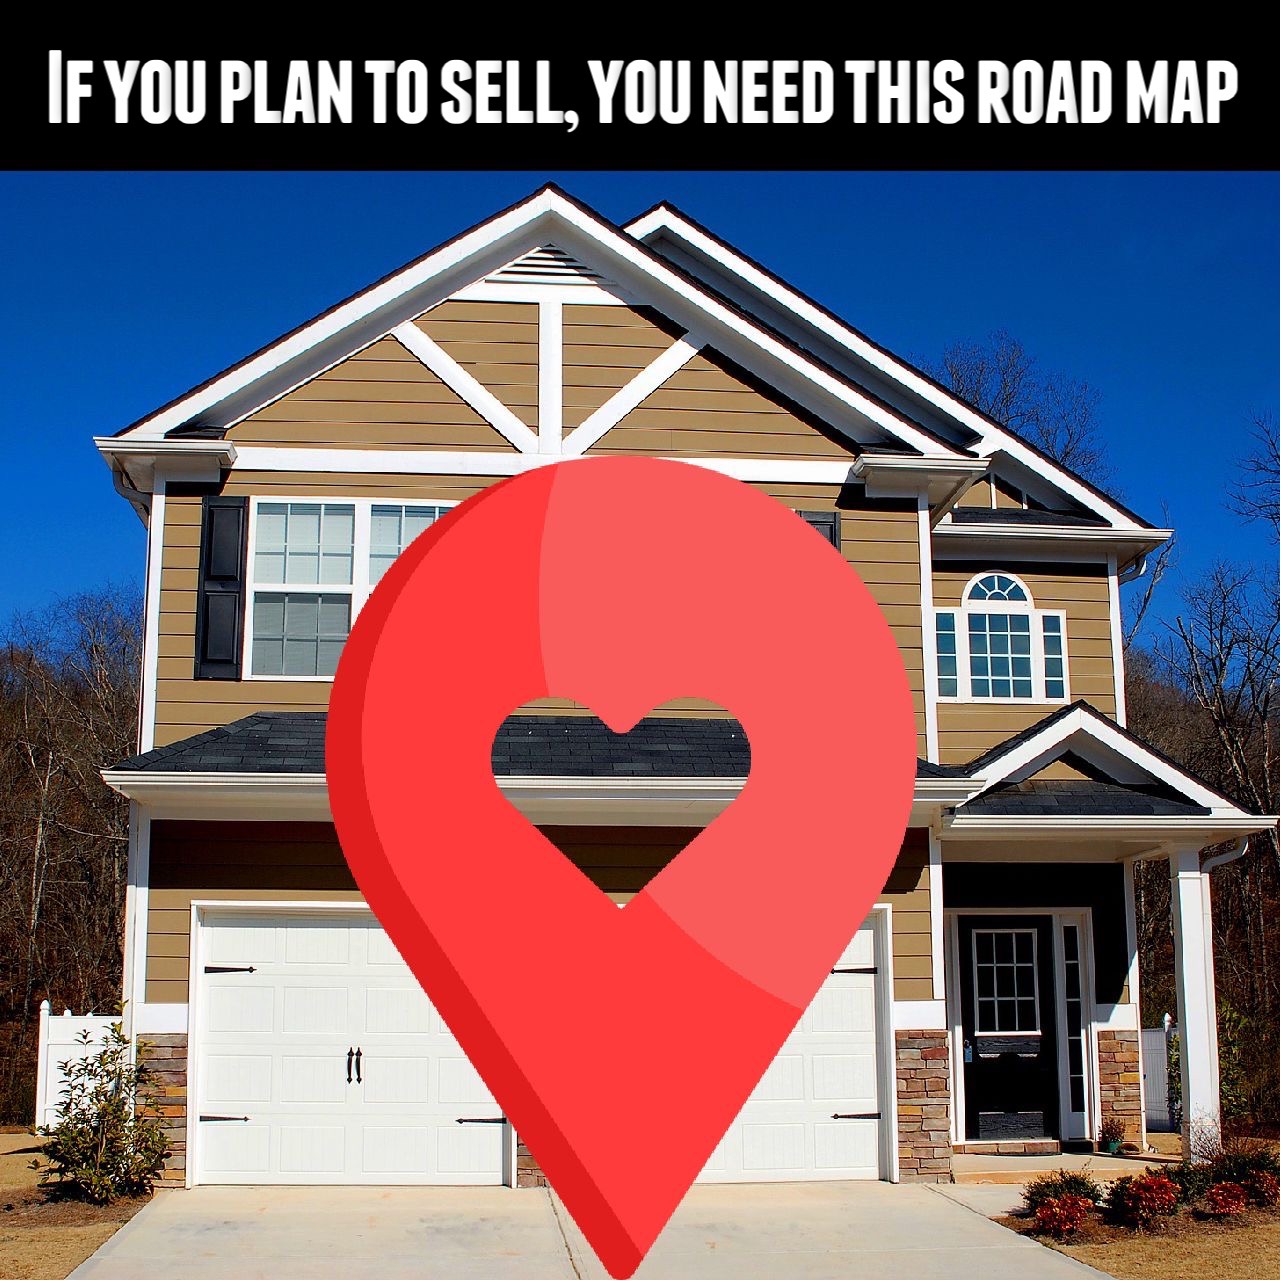 If you plan to sell, you need this road map